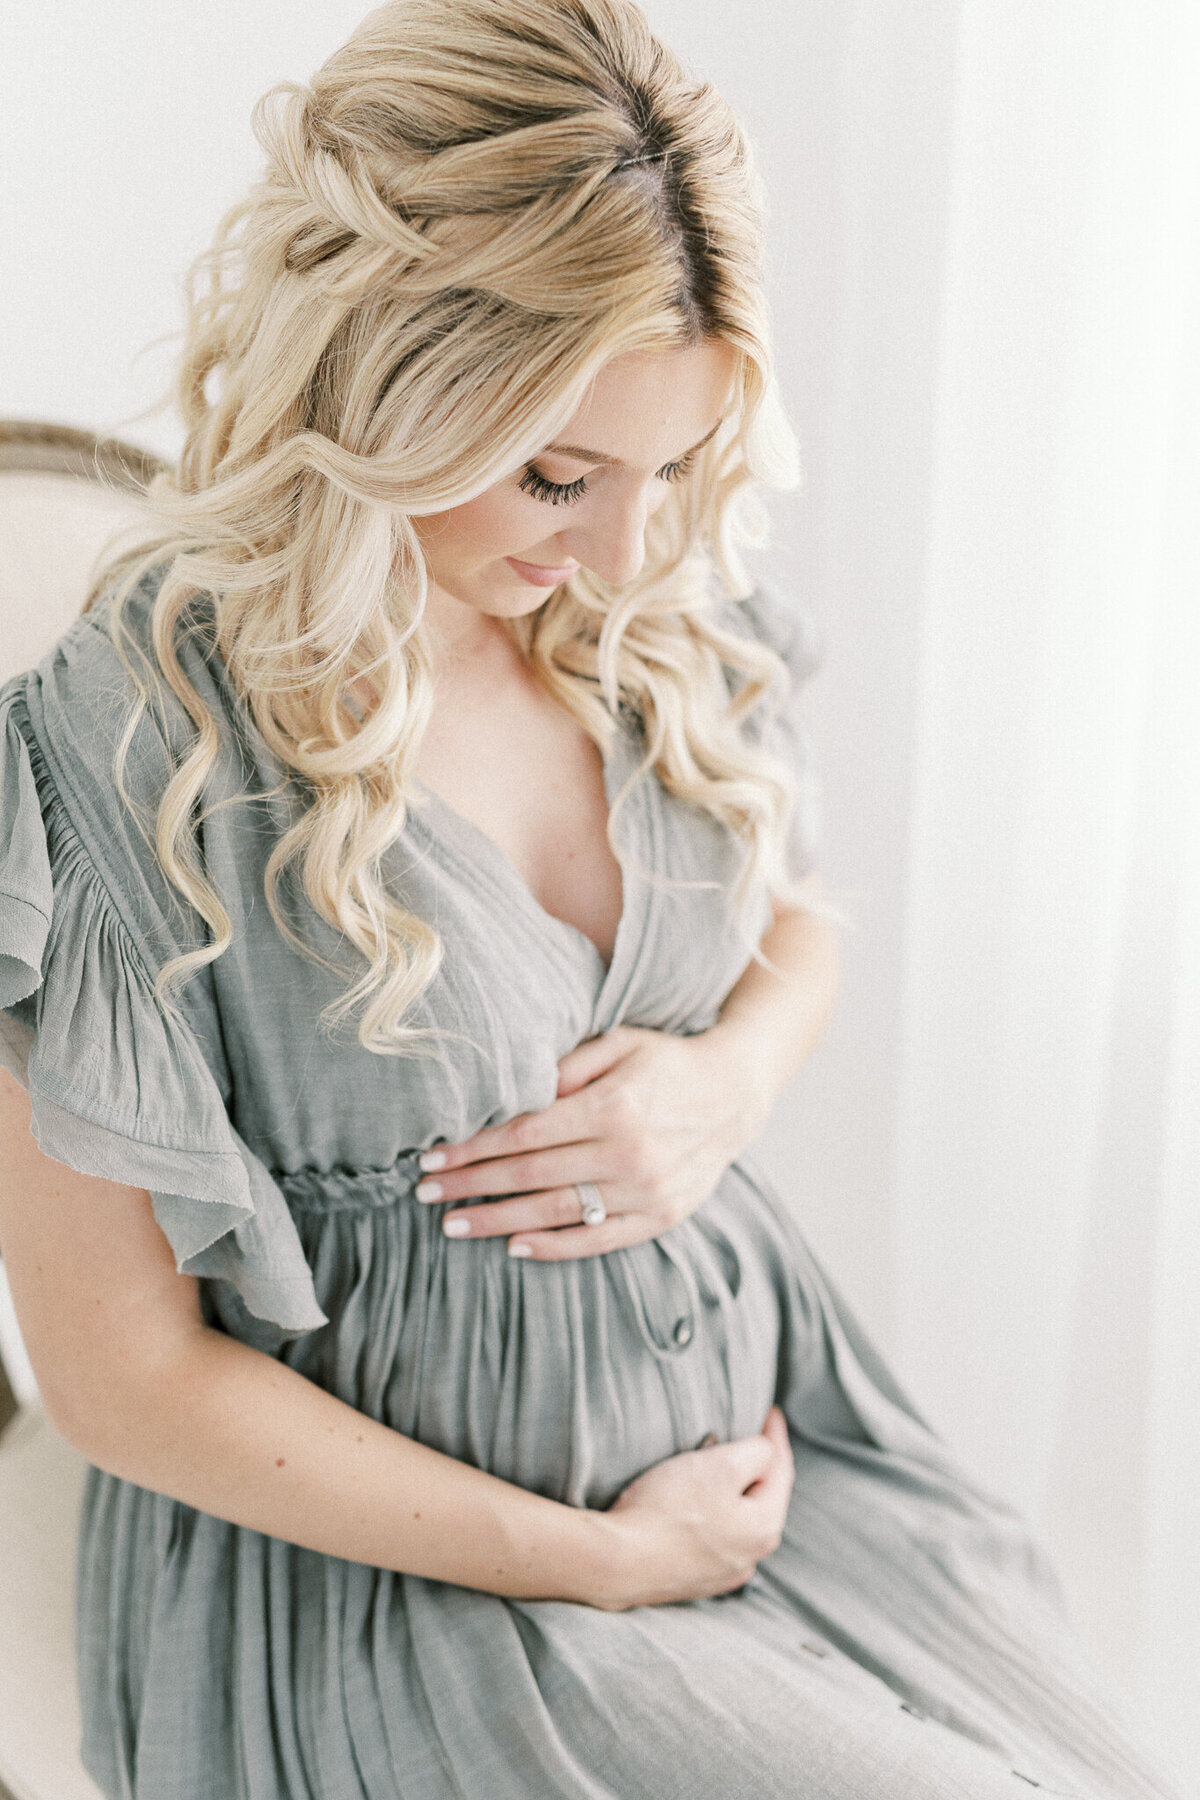 Best maternity and newborn photographers in Cleveland Ohio